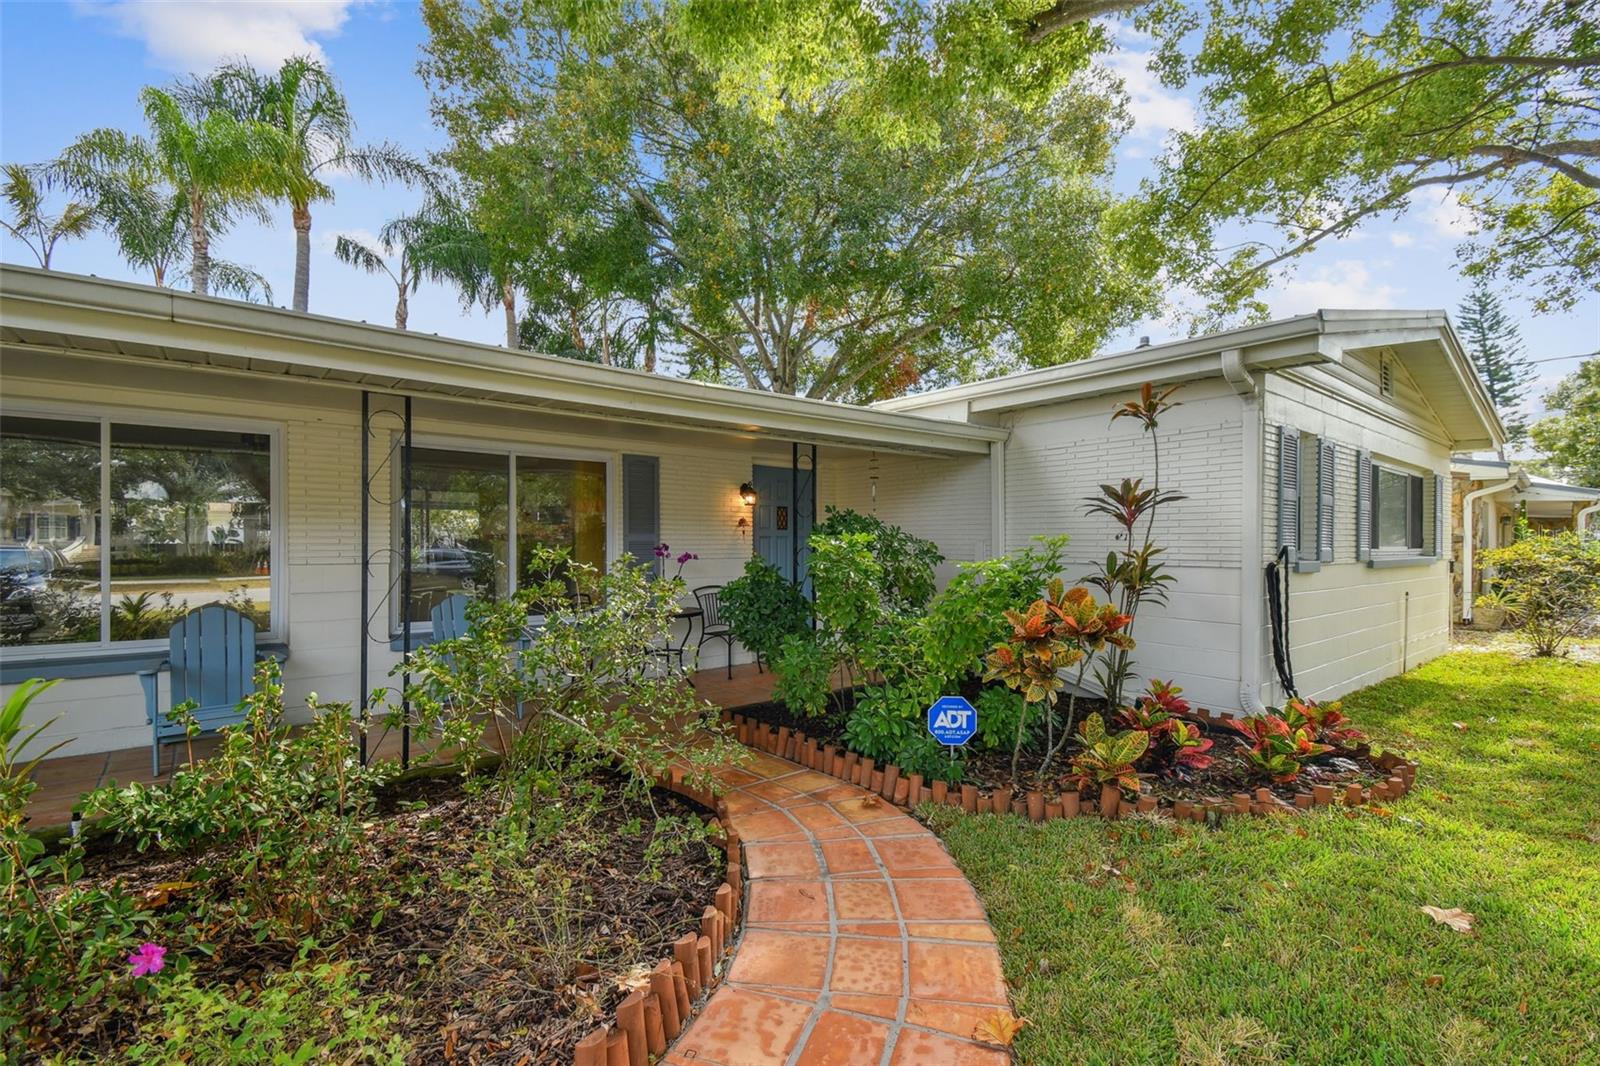 Beautiful block home with endearing curb appeal